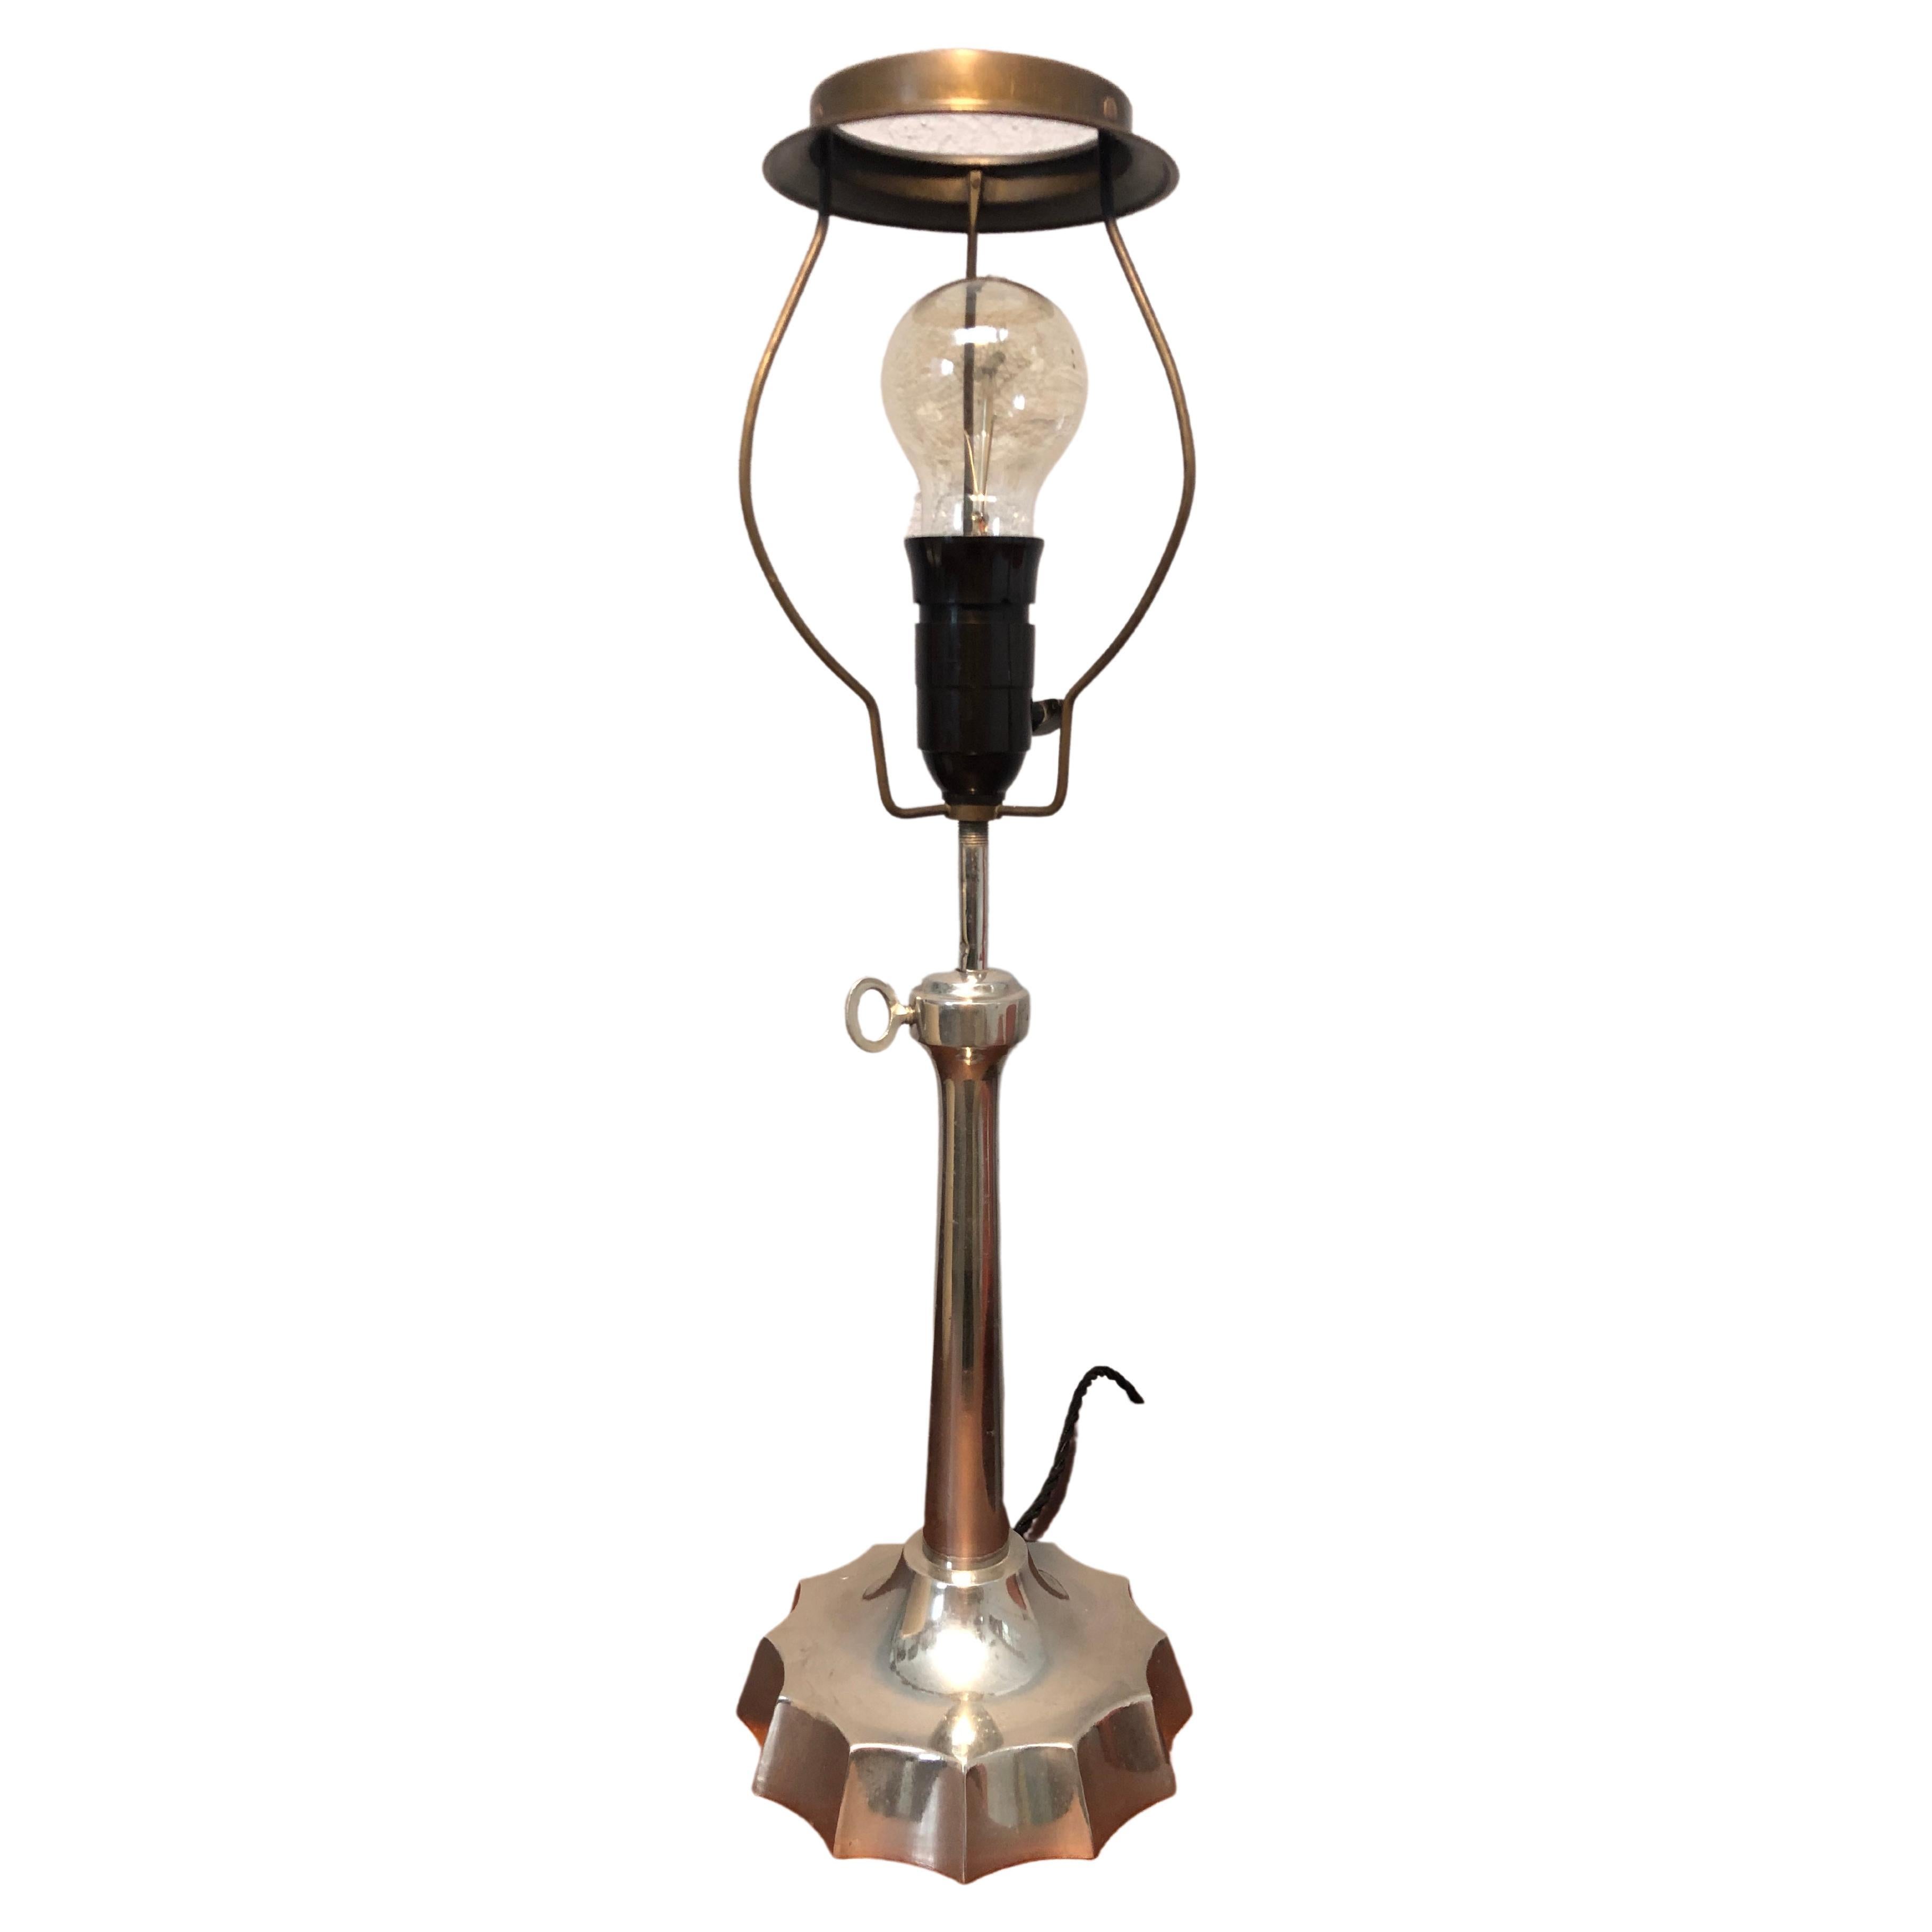 Antique Art Deco Table Lamp from the 1920s